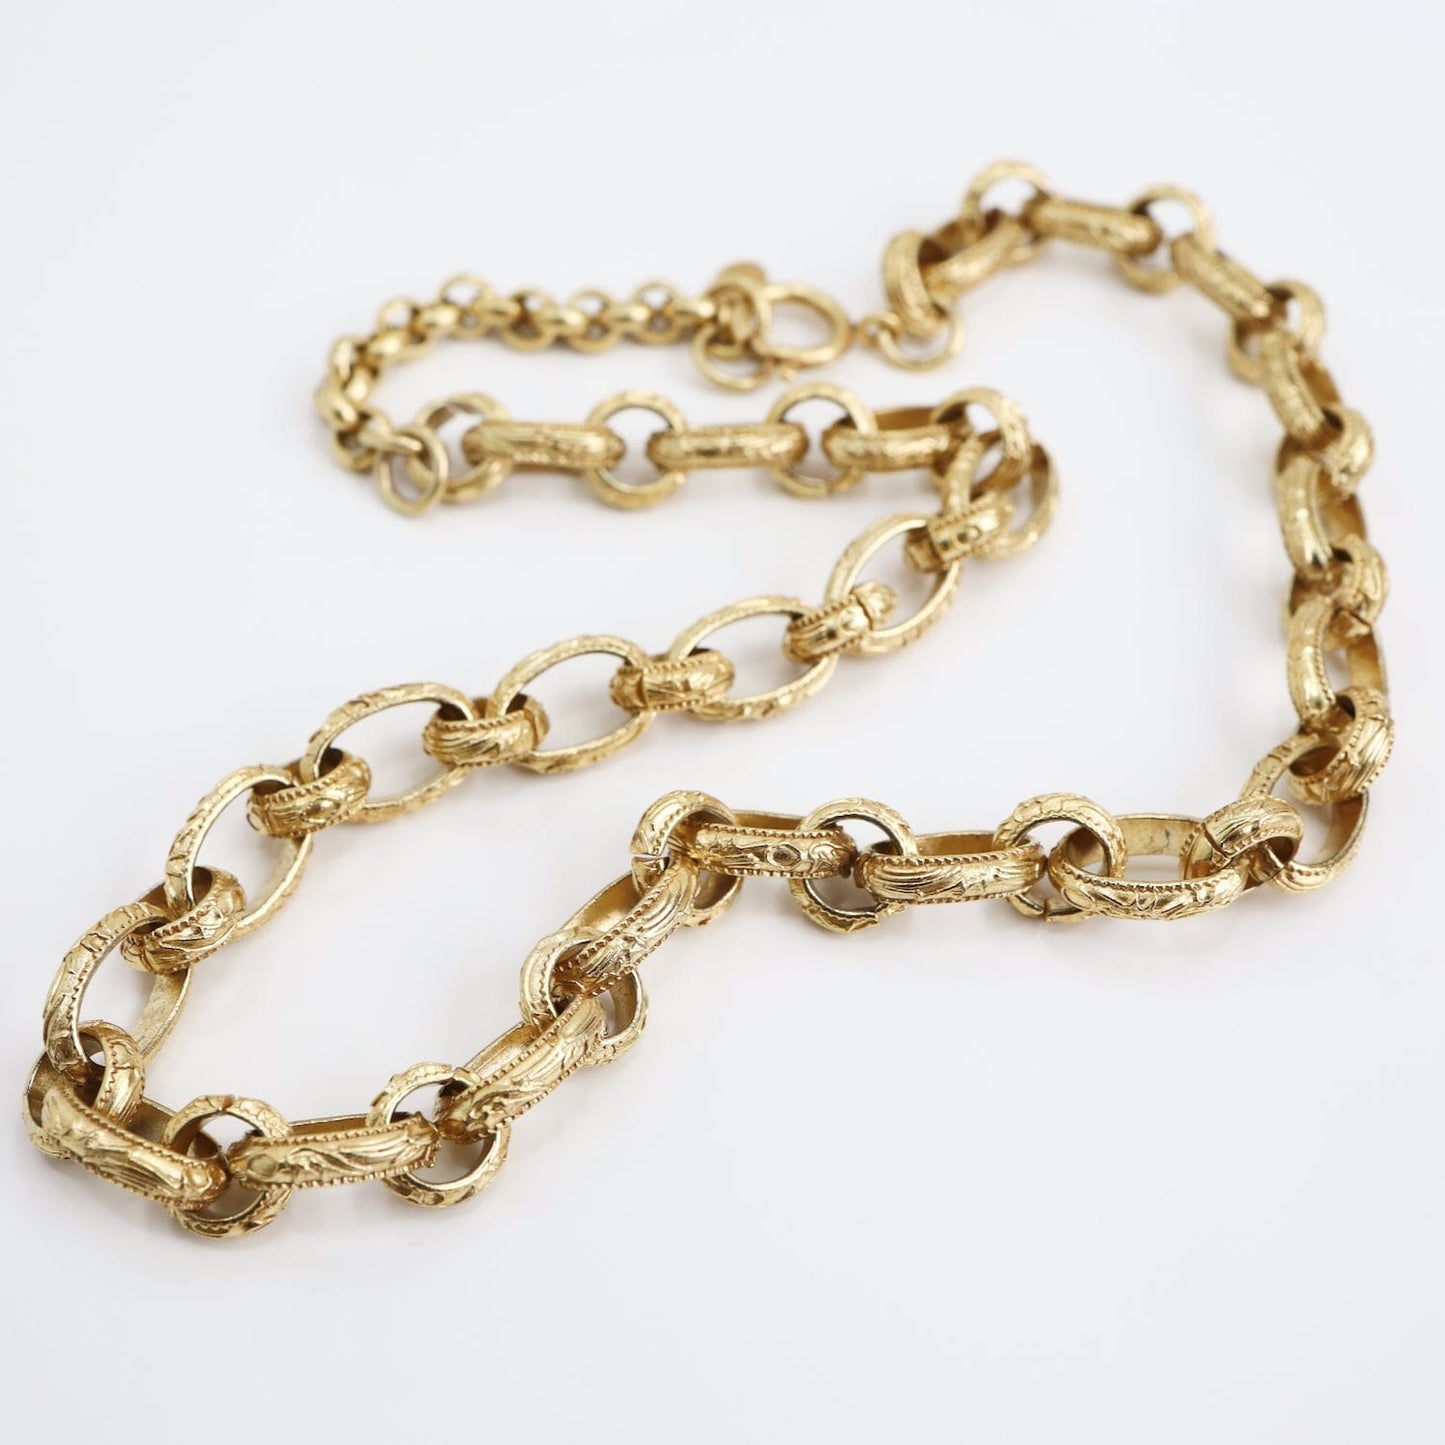 NKL-JM Heavy Embossed Chain Necklace